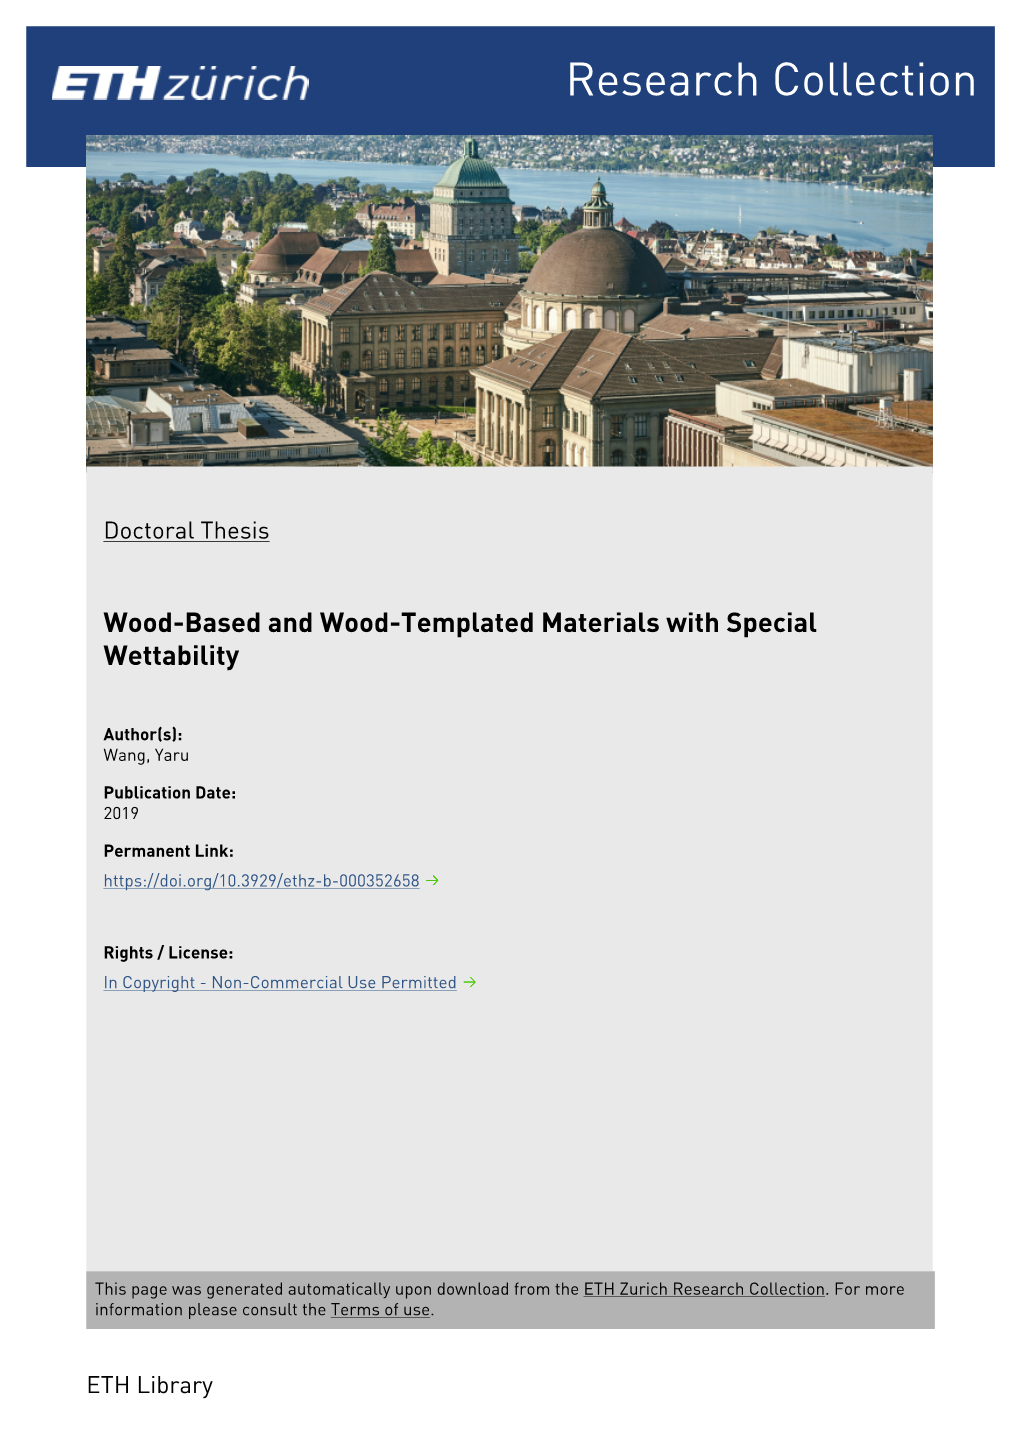 Wood-Based and Wood-Templated Materials with Special Wettability